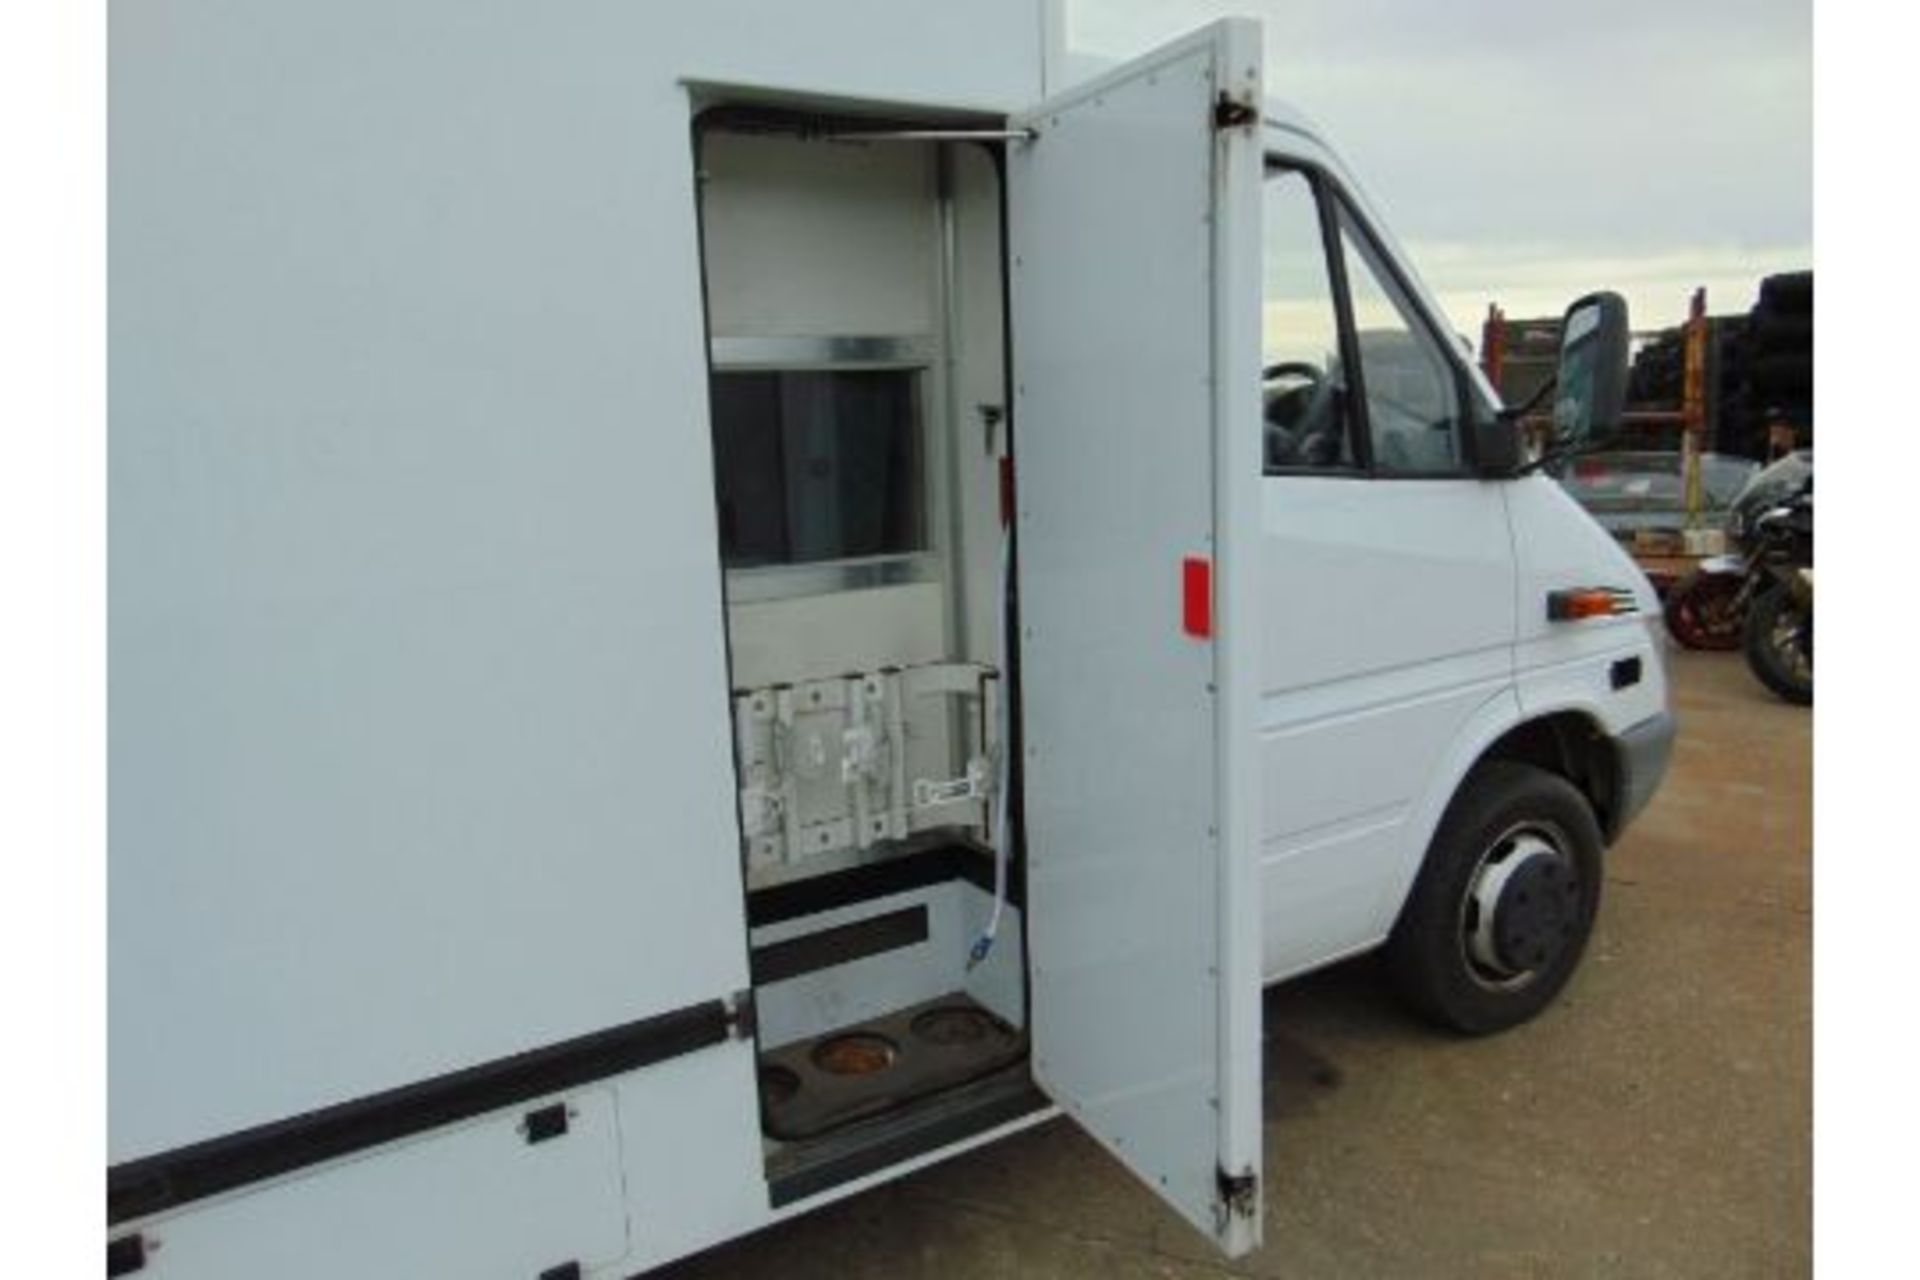 Recent Released by Atomic Weapons Establishment a 2002 Mercedes 418 CDi Ambulance ONLY 32,825 Miles - Image 24 of 34